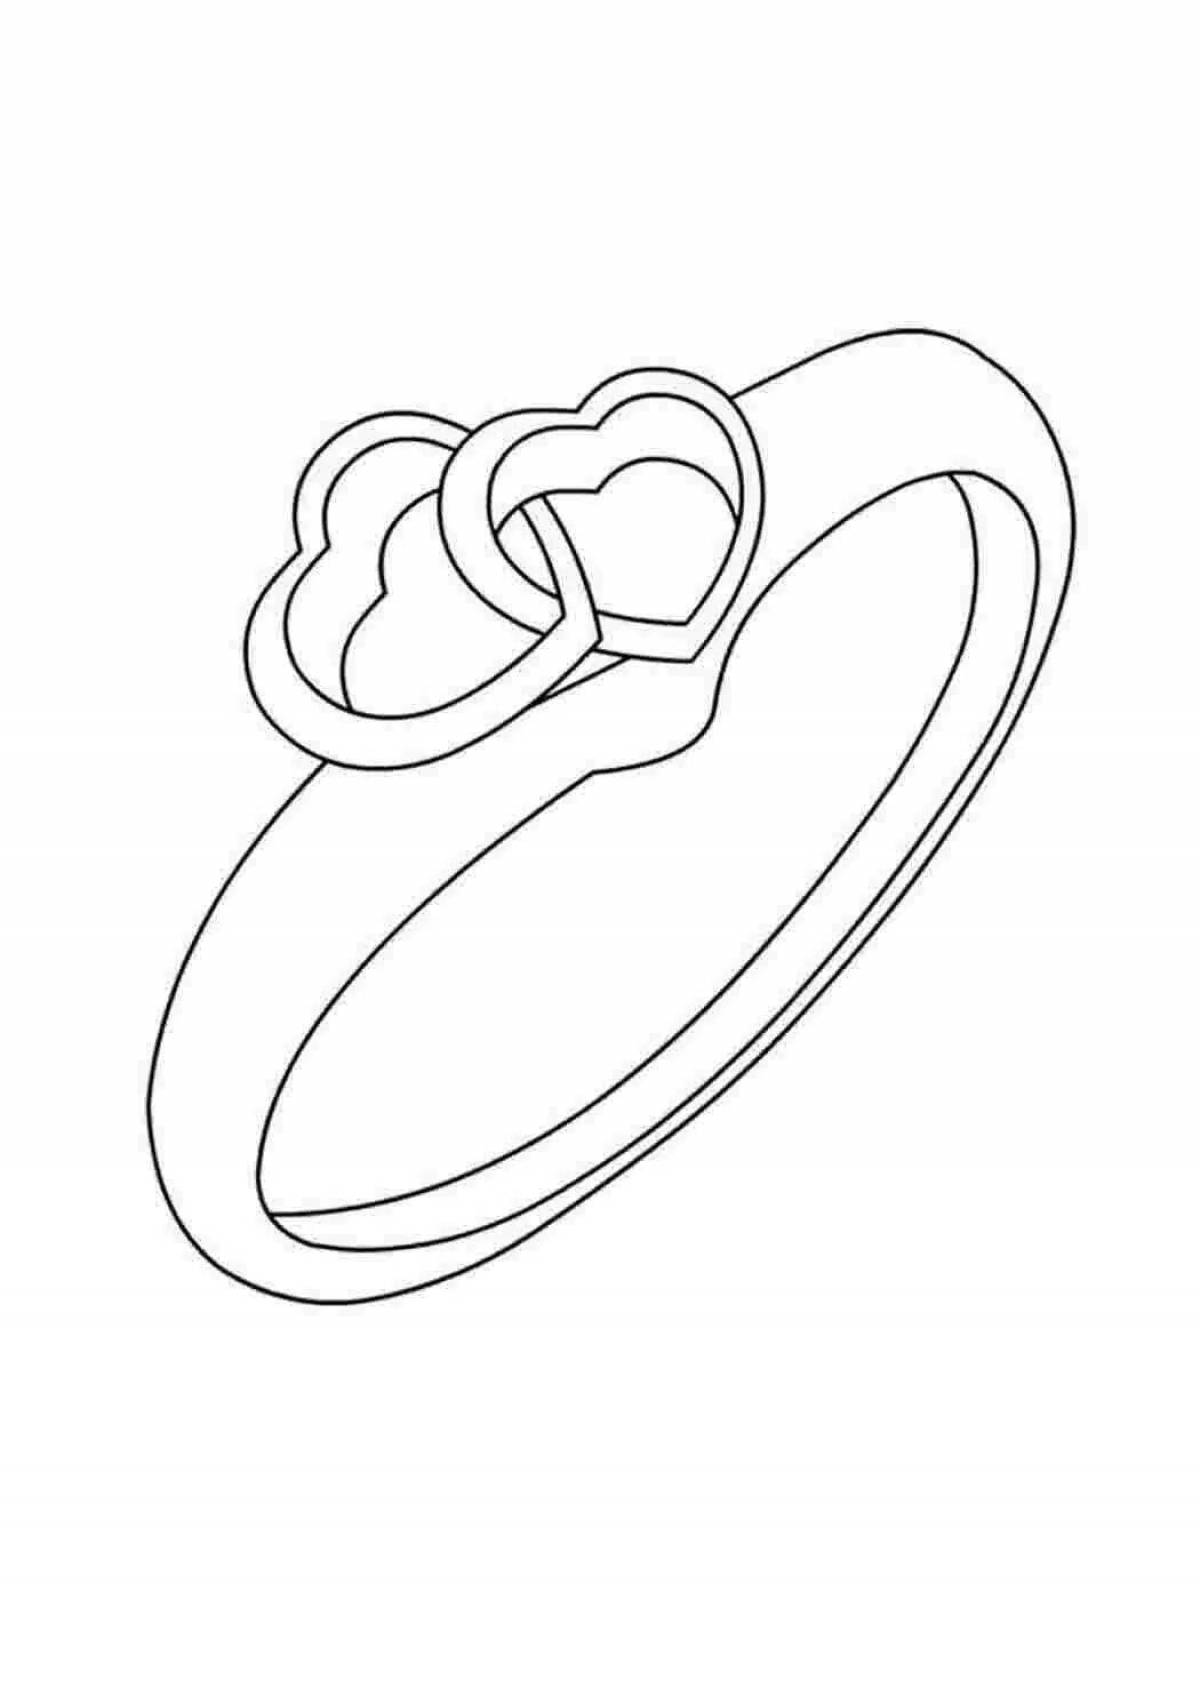 Luxury wedding ring coloring pages